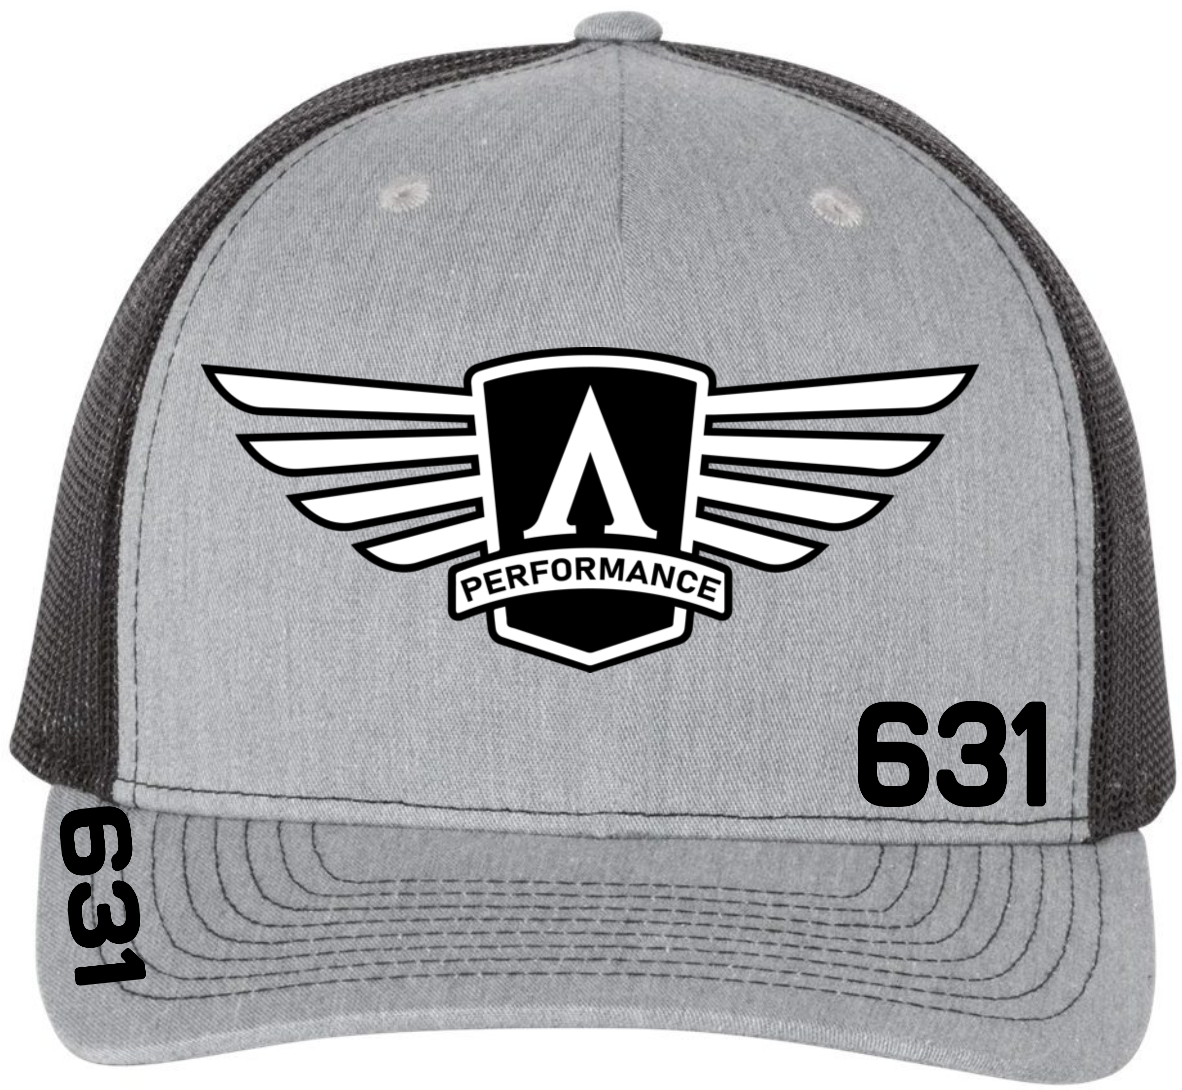 Heather Grey/Black Logo with number